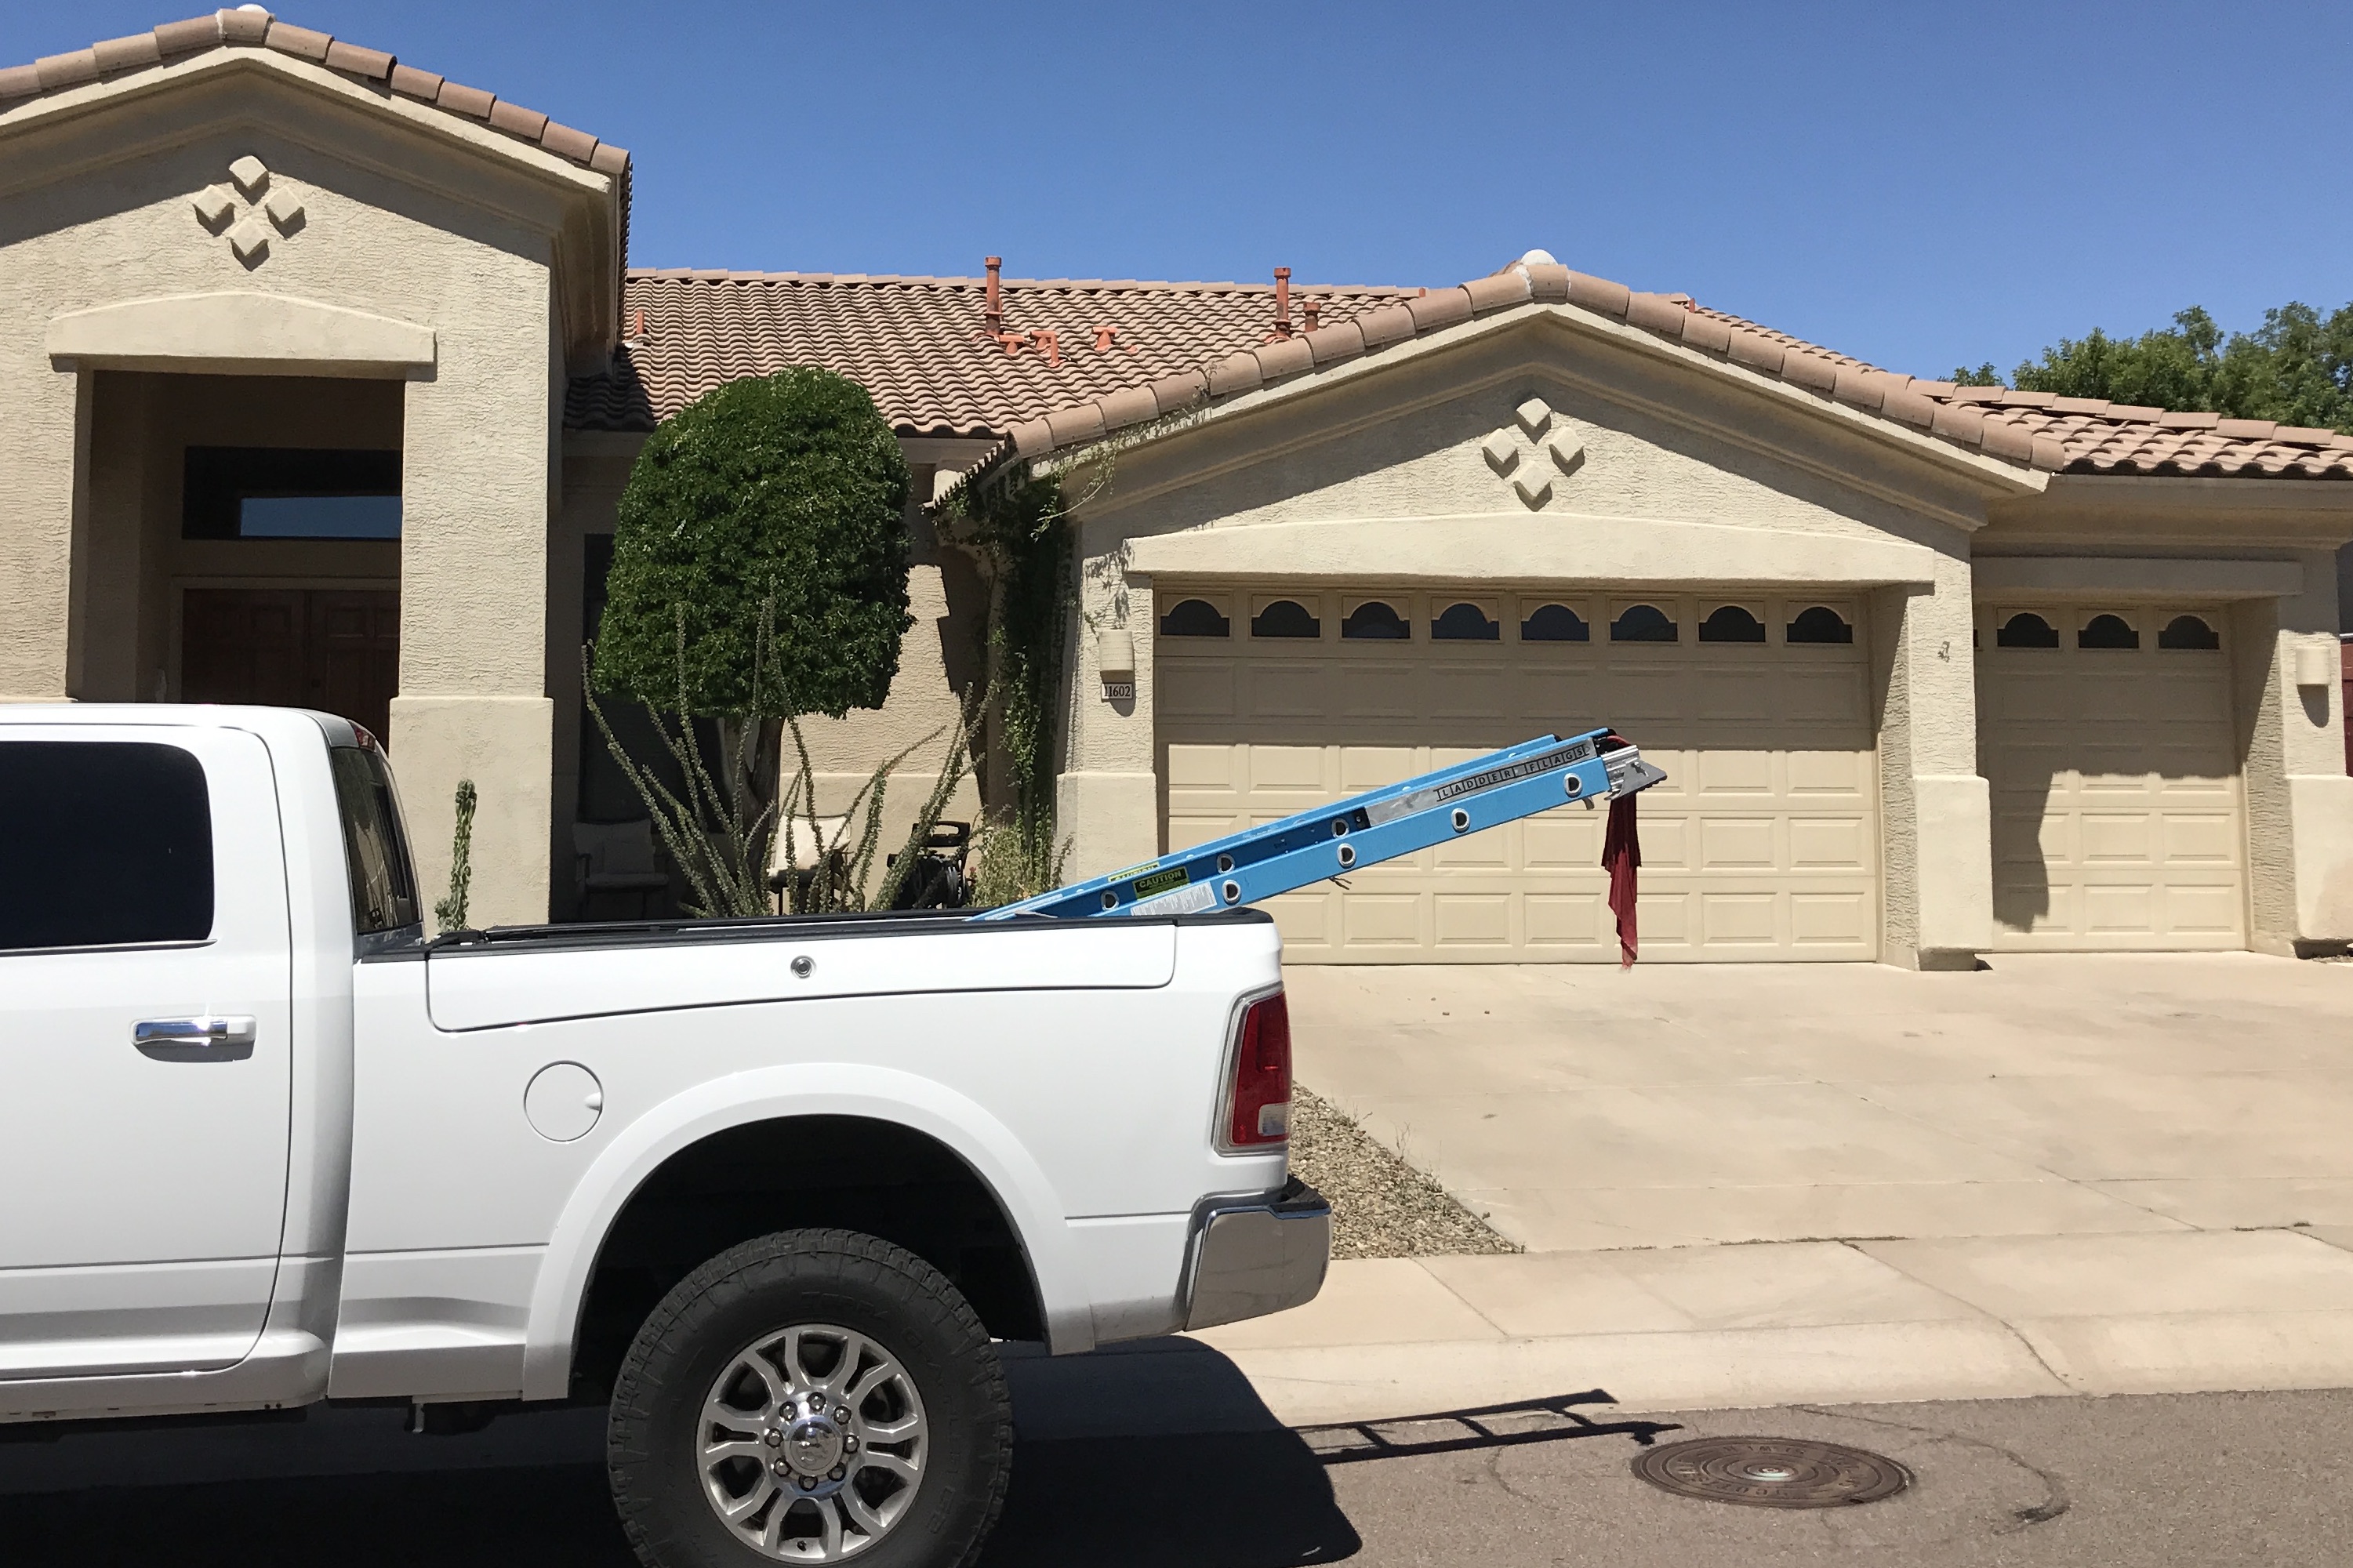 Professional and 'OSHA' Compliant Ladder Flag displayed on ladder in truck box parked in front of new tile roof on home an